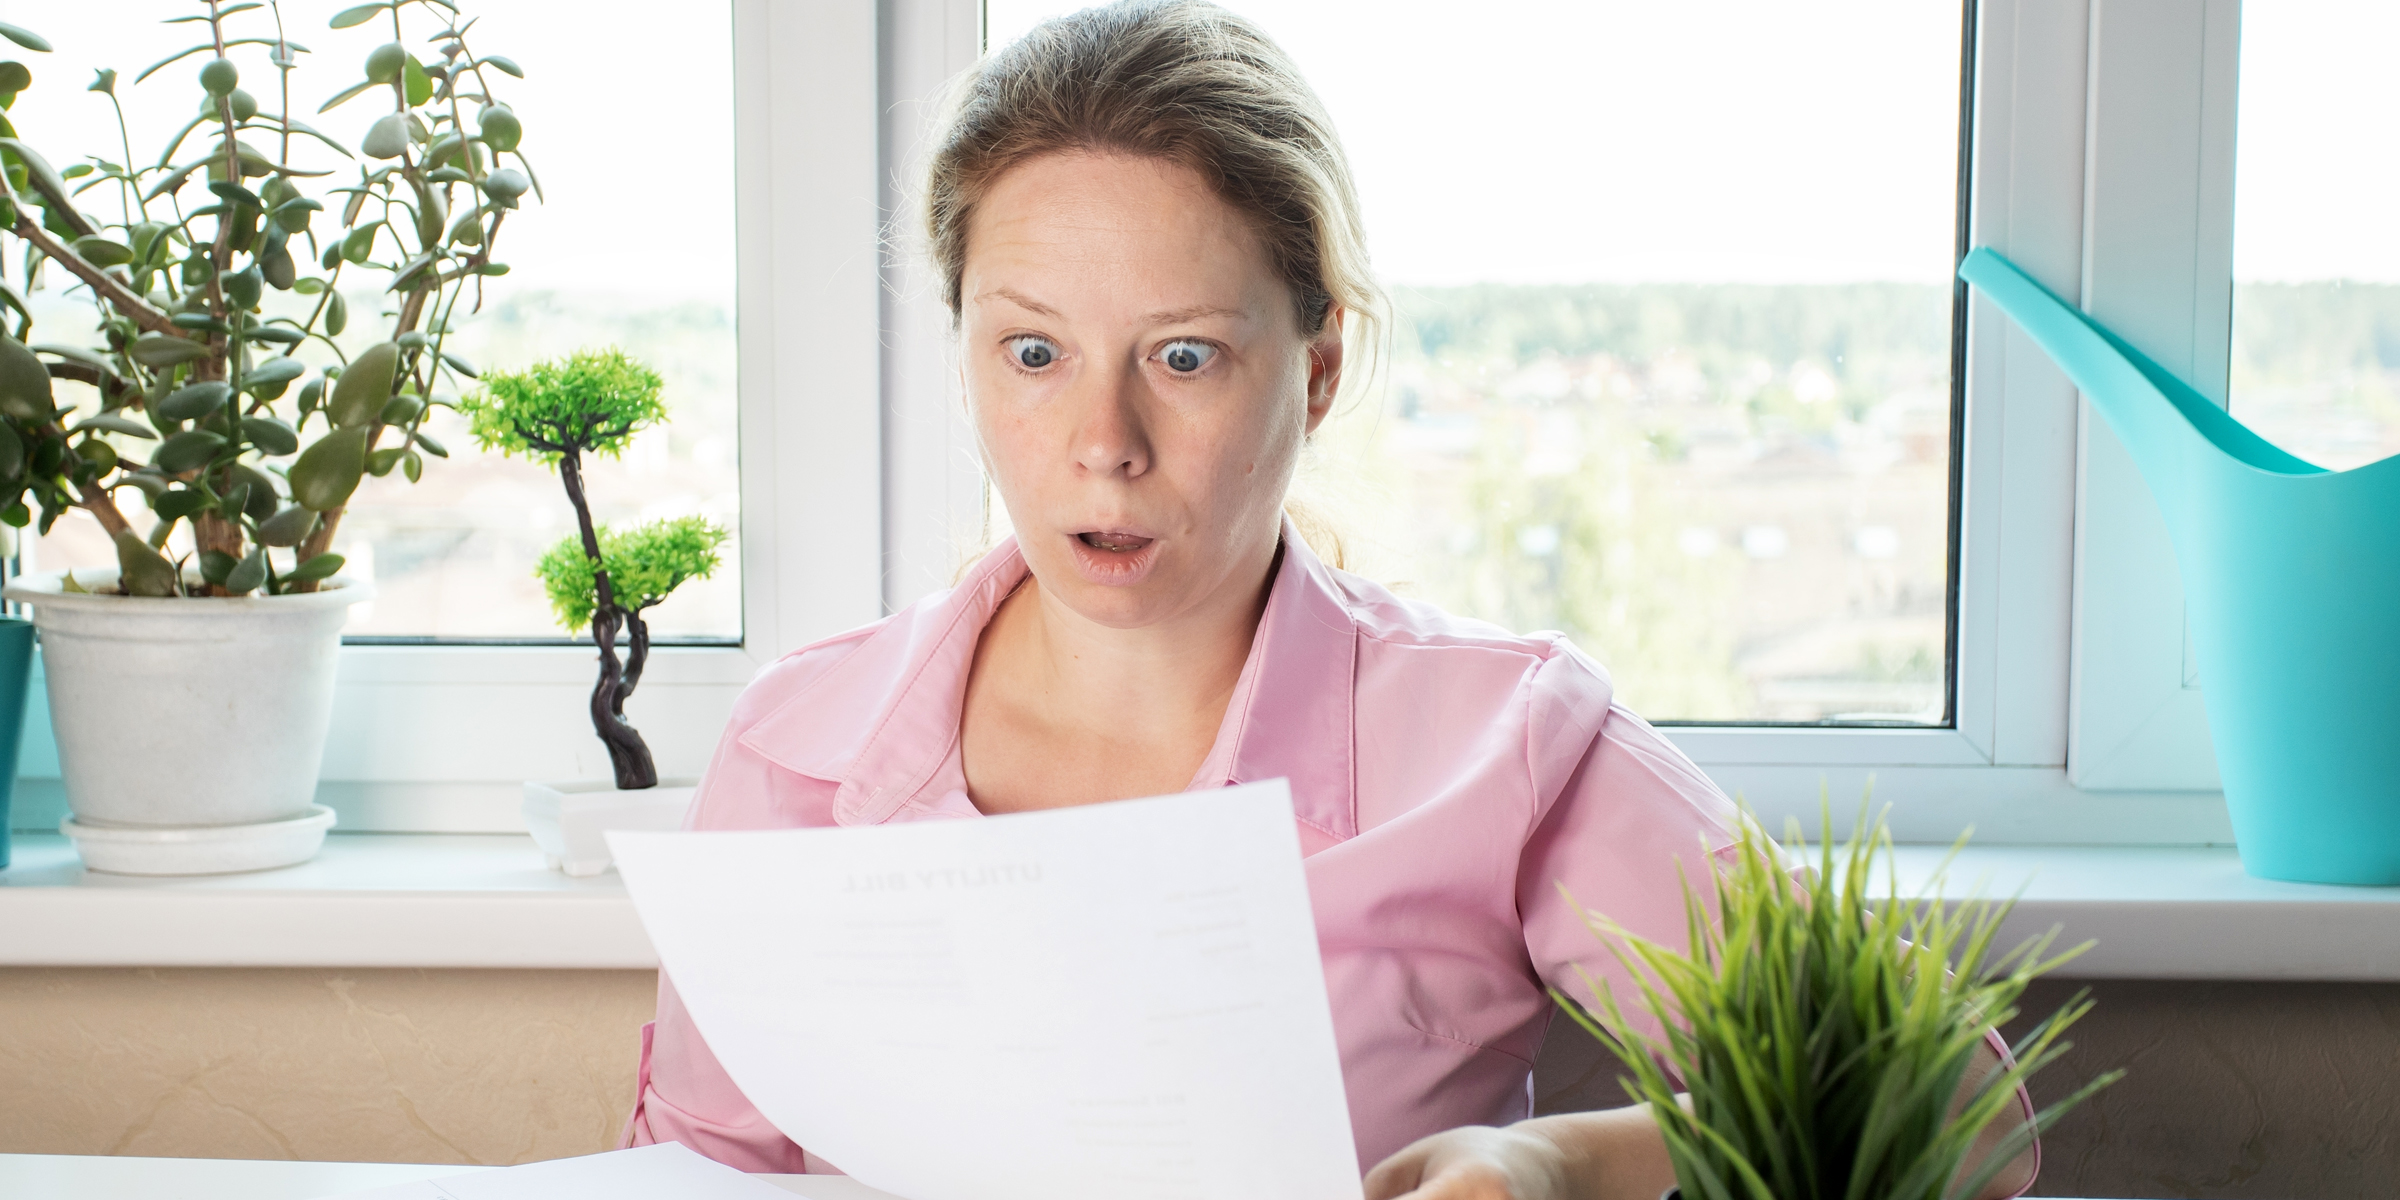 A shocked woman reading something on a paper | Source: Shutterstock